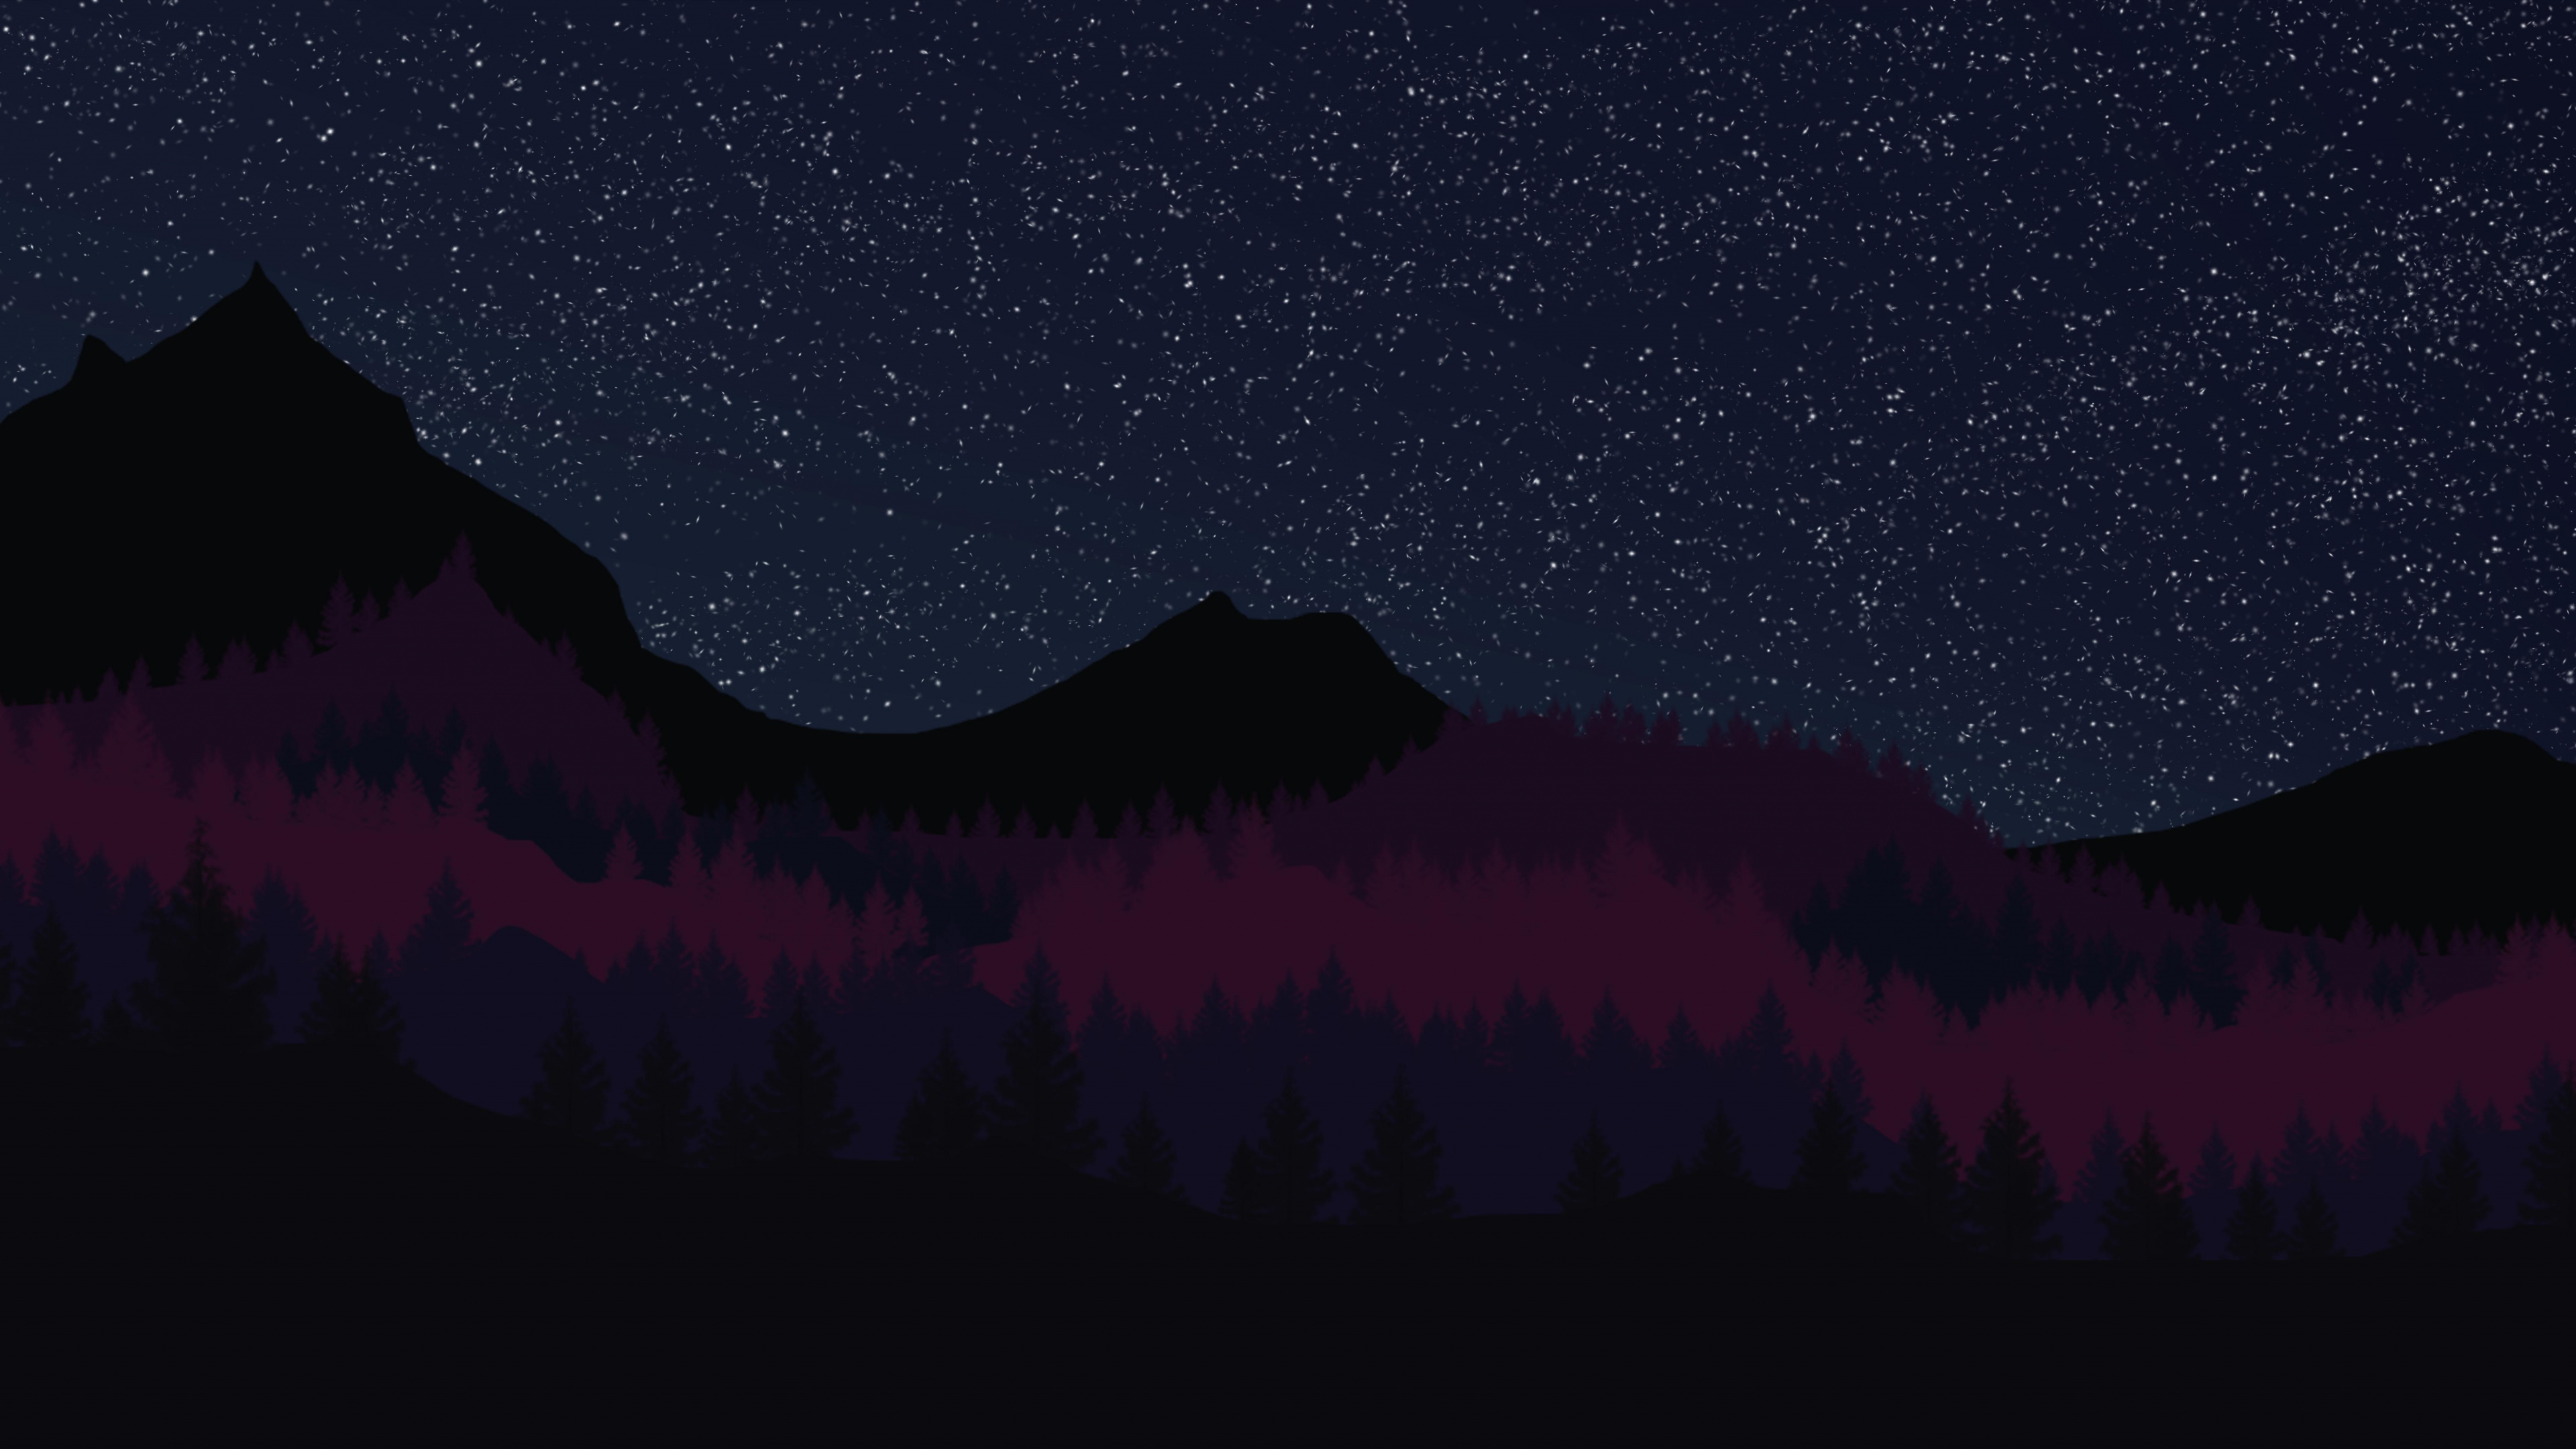 Silhouette of Trees Under Starry Night. Wallpaper in 3840x2160 Resolution